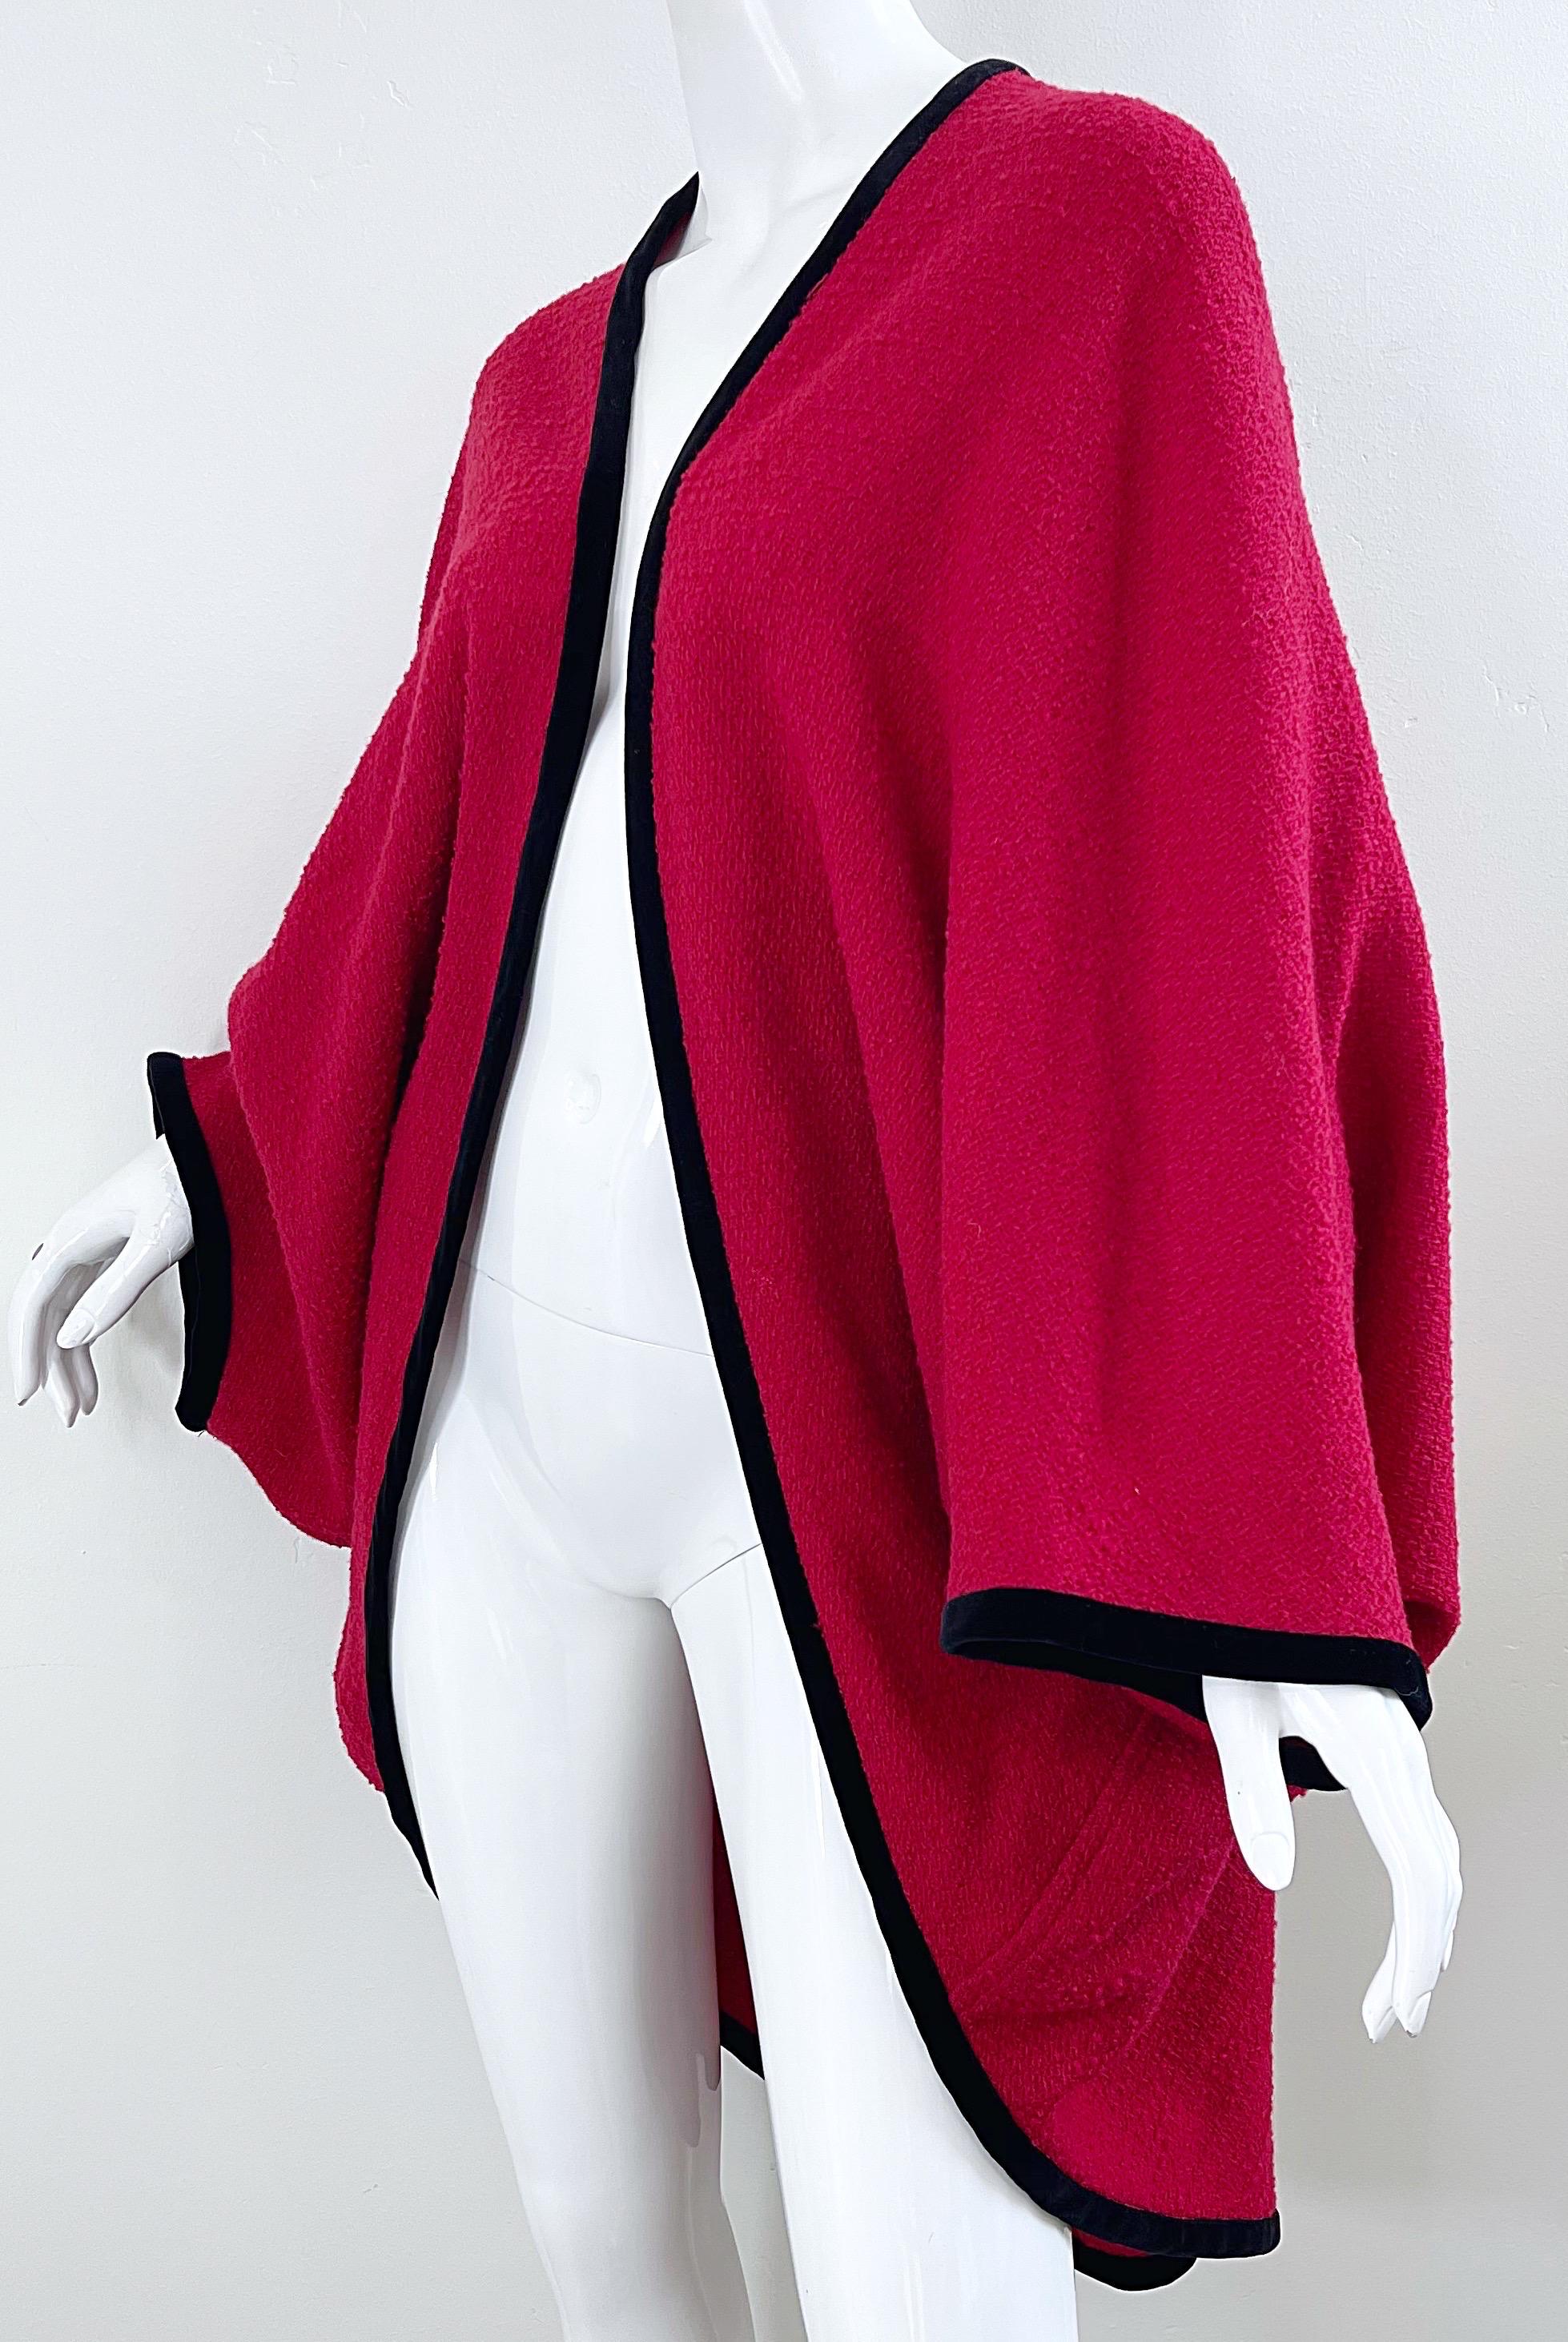 Karl Lagerfeld 1980s Lipstick Red Boiled Wool Cocoon Vintage Cape Kimono Jacket For Sale 5